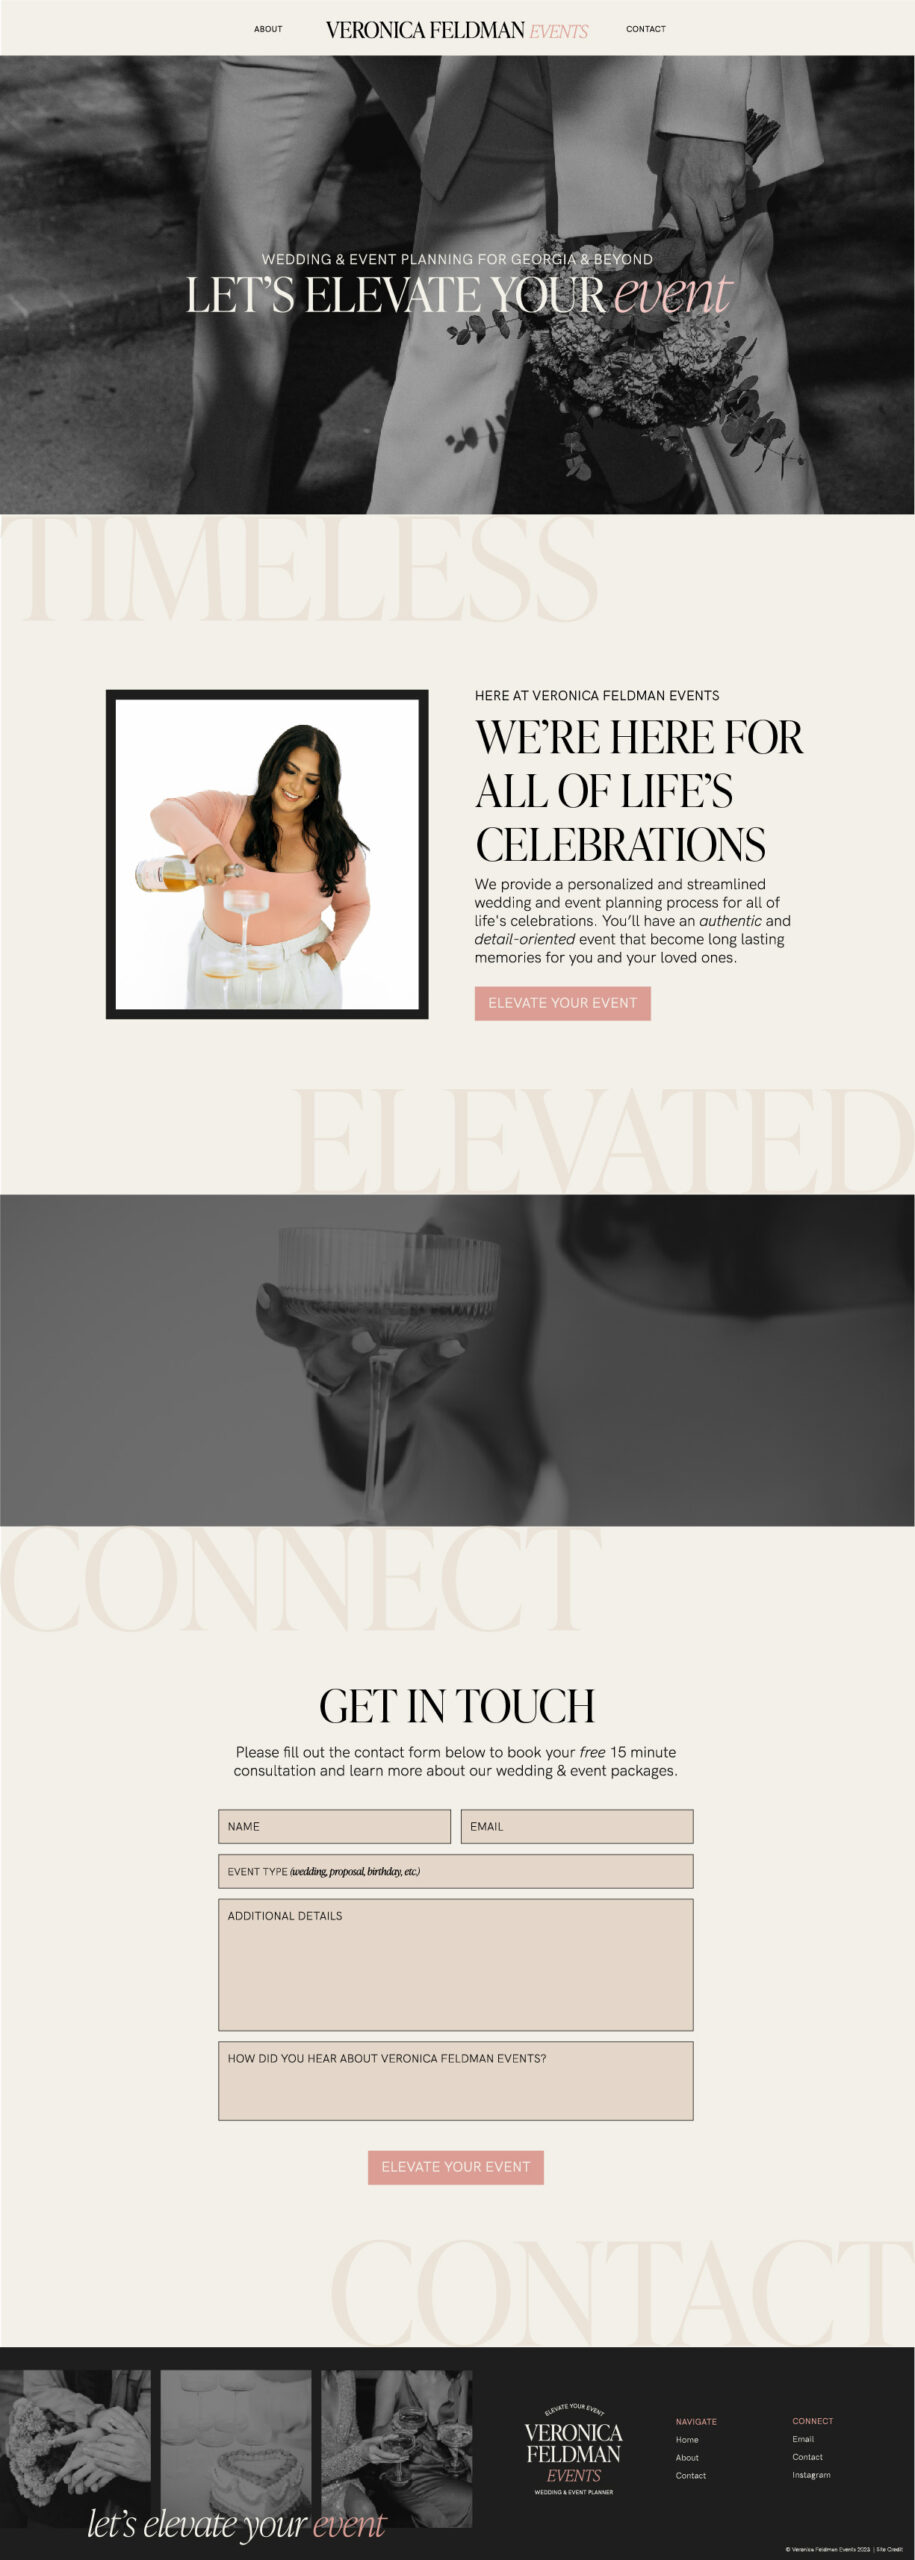 Website mockup of a bold, luxe, & editorial brand. Lots of black and white images paired with pops of pink text.